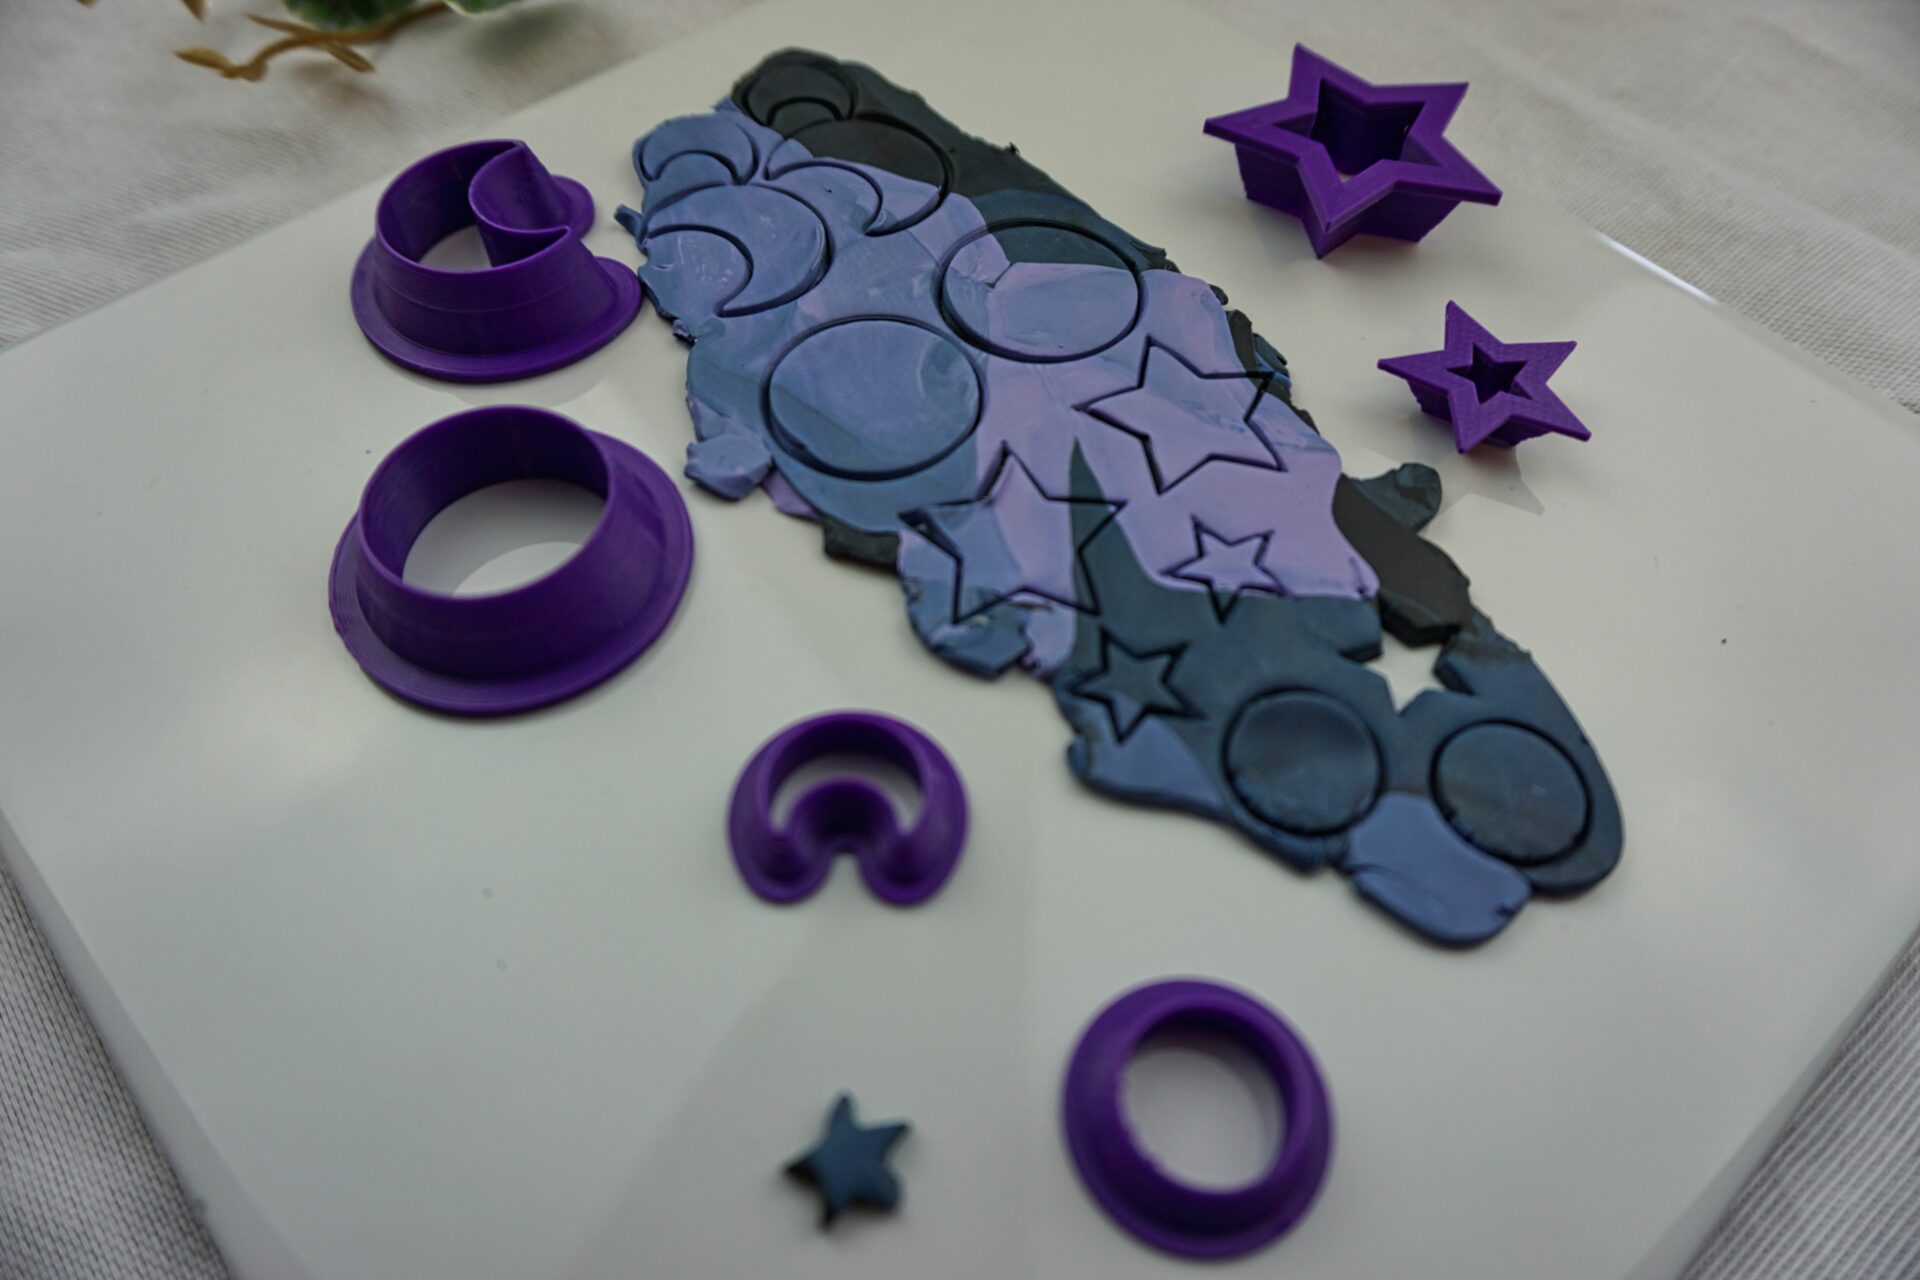 Moon phases and star polymer clay cutter set